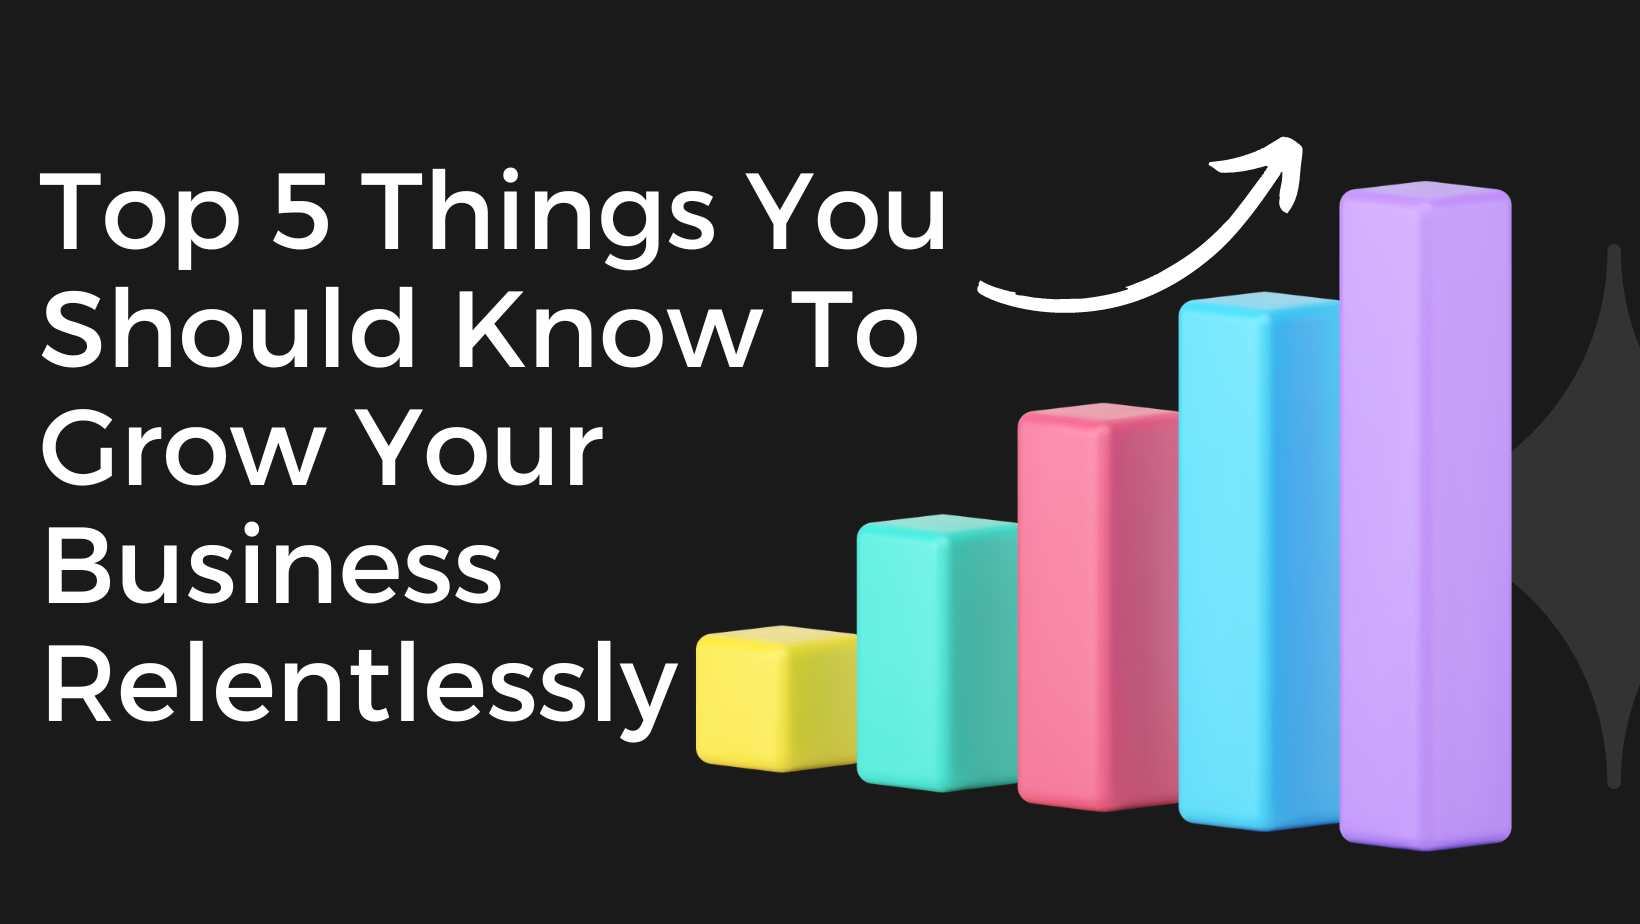 Top 5 Things You Should Know To Grow Your Business Relentlessly